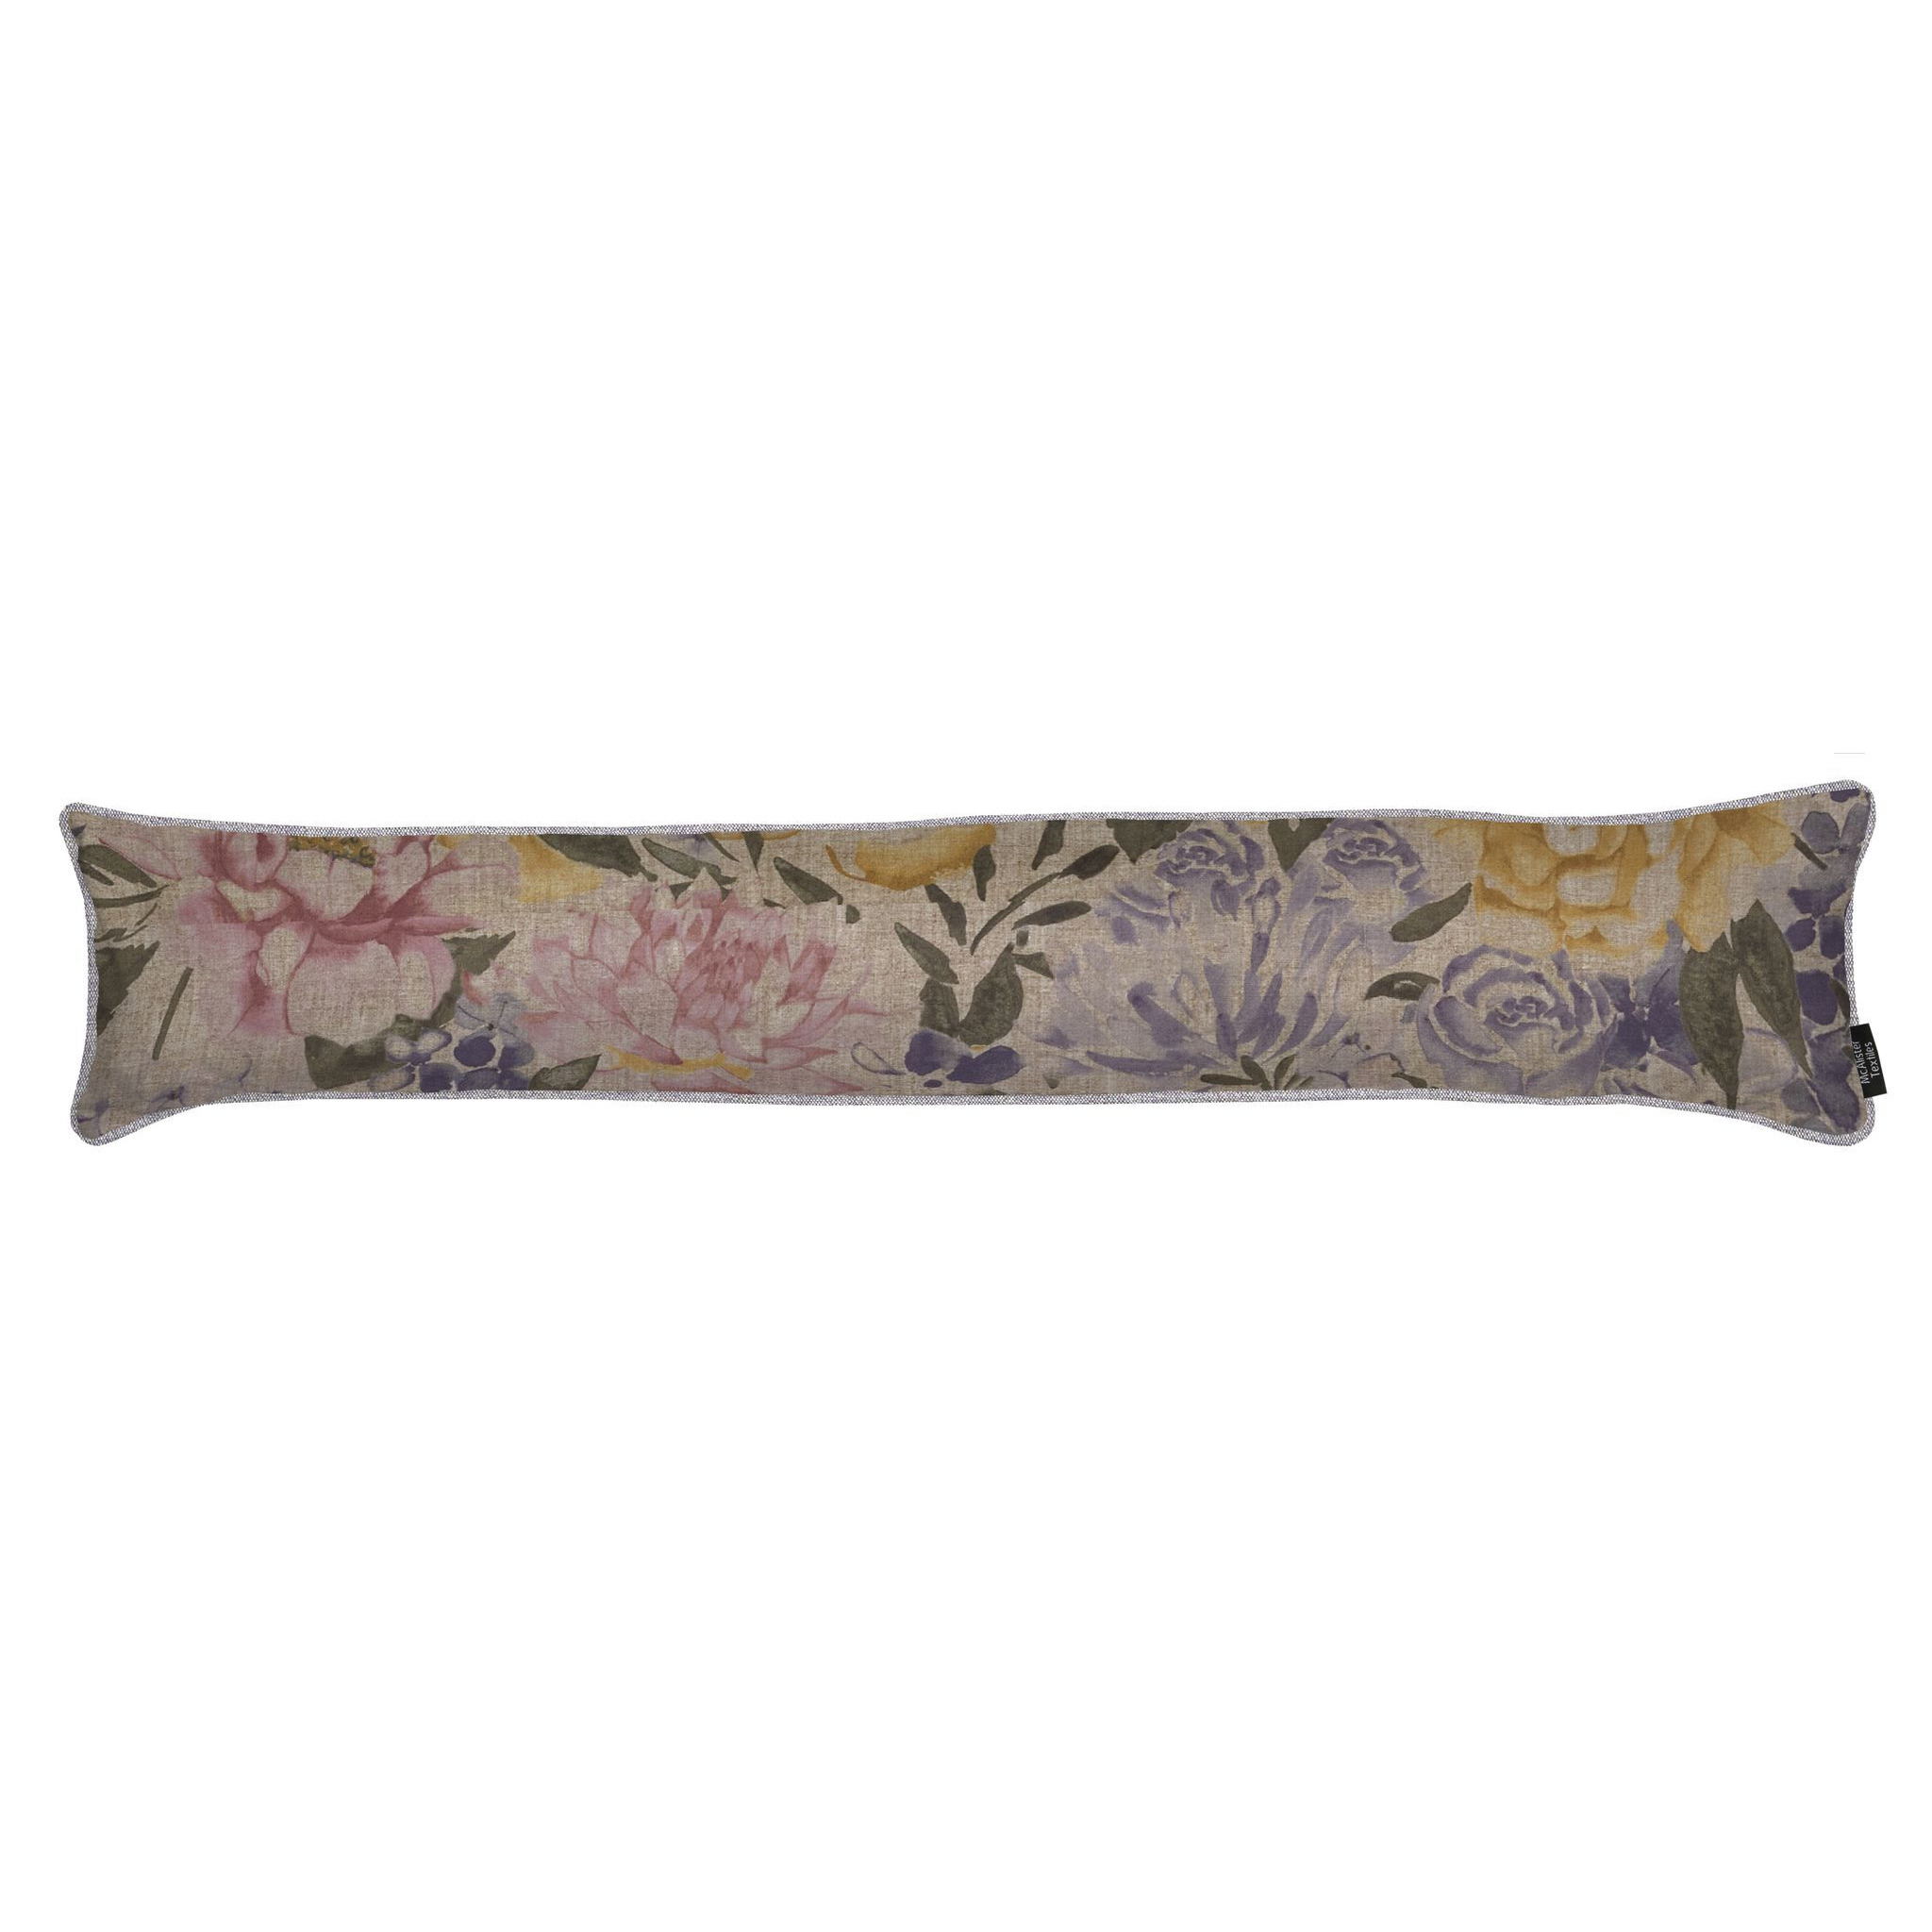 Blooma Purple, Pink and Ochre Floral Draught Excluder, 18cm x 80cm